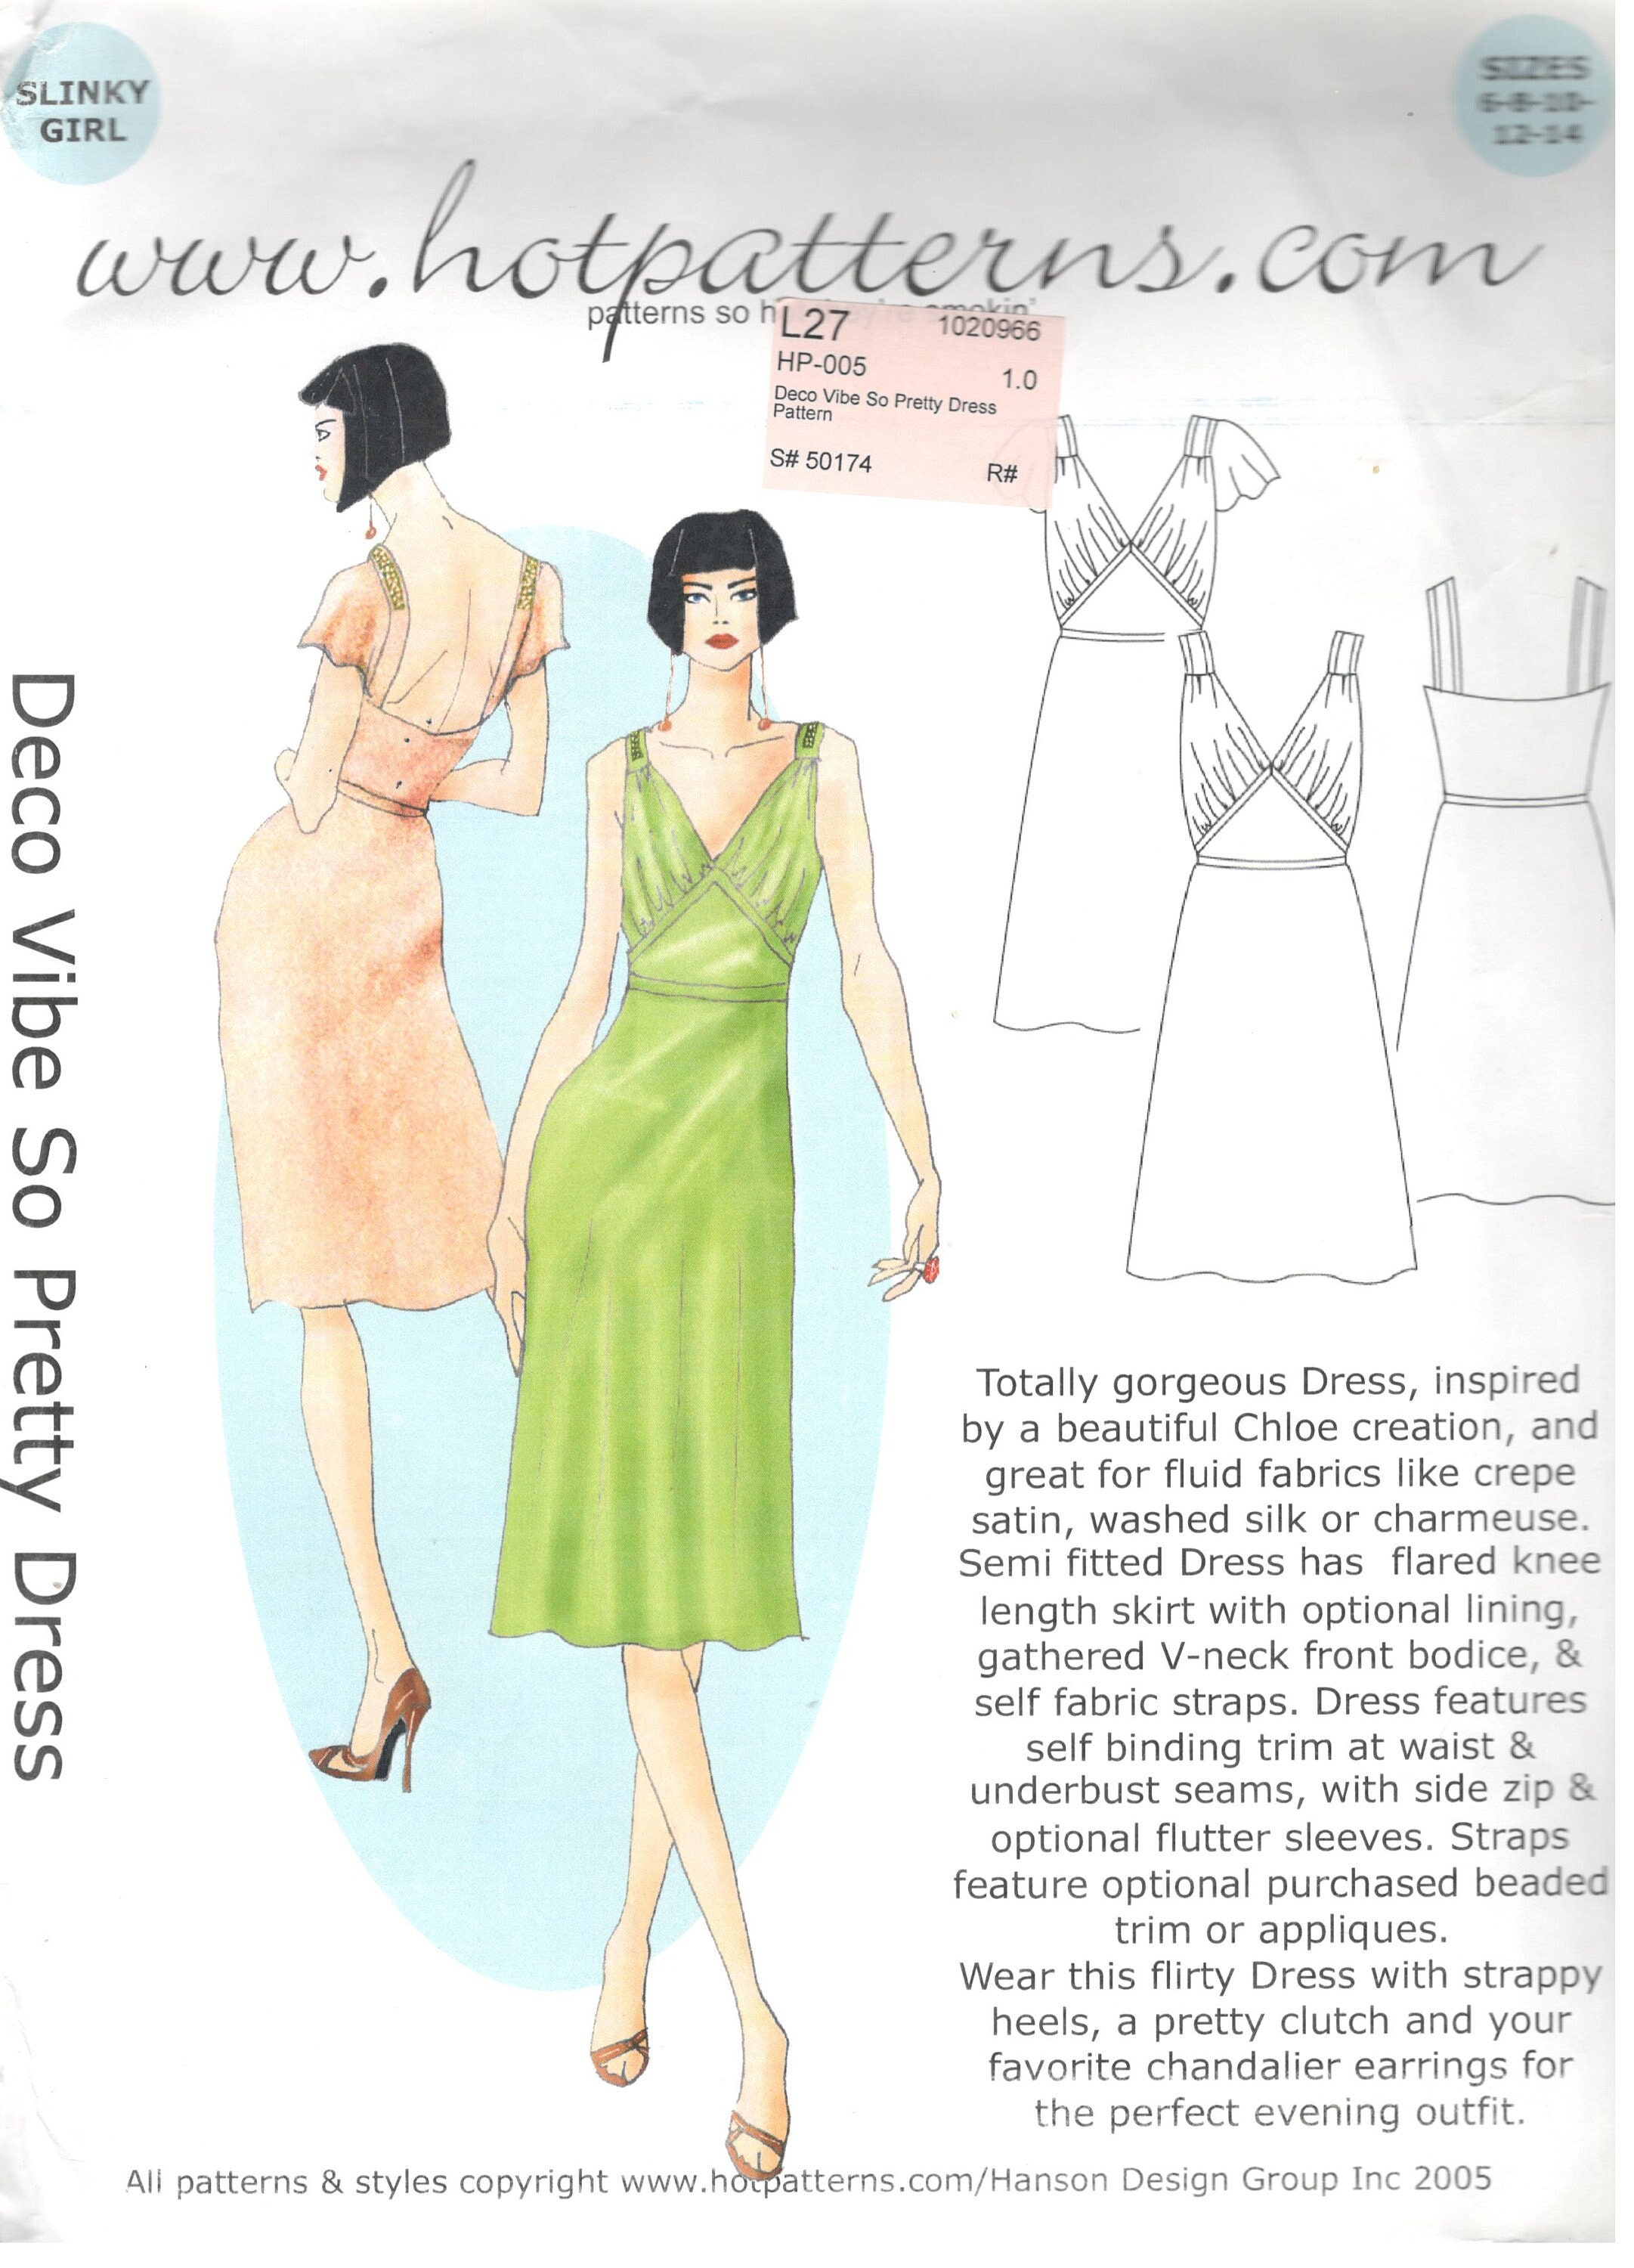 Hotpatterns 005 Slinky Girl Womens Deco Vibe So Pretty V Neck Evening Dress  Pattern Womens Sewing Pattern Size 6 8 10 12 14 UNCUT -  Portugal